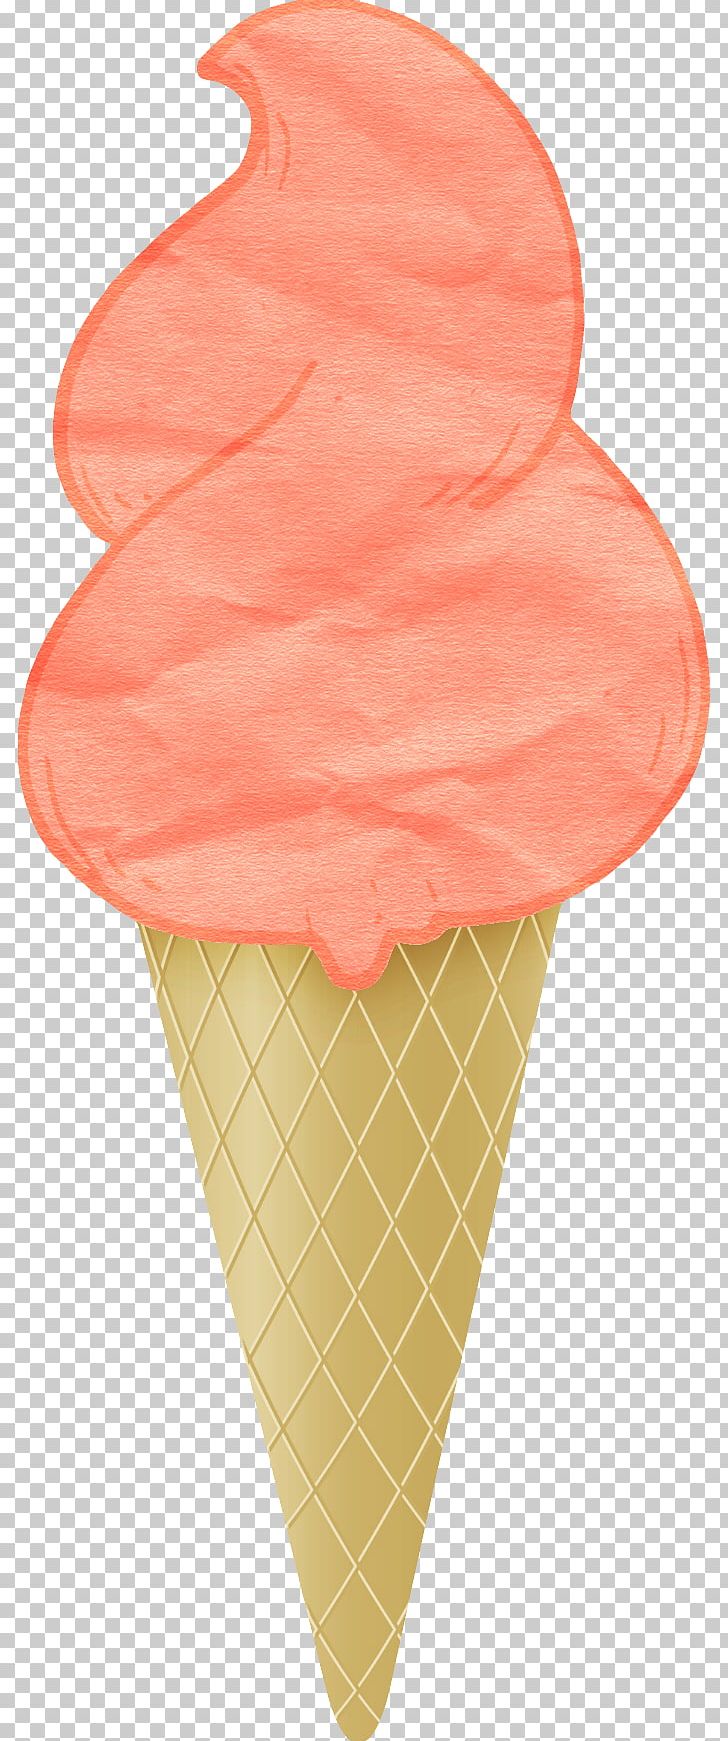 Ice Cream Cone Gelato Drawing PNG, Clipart, Animation, Balloon Cartoon, Boy Cartoon, Cartoon, Cartoon Character Free PNG Download